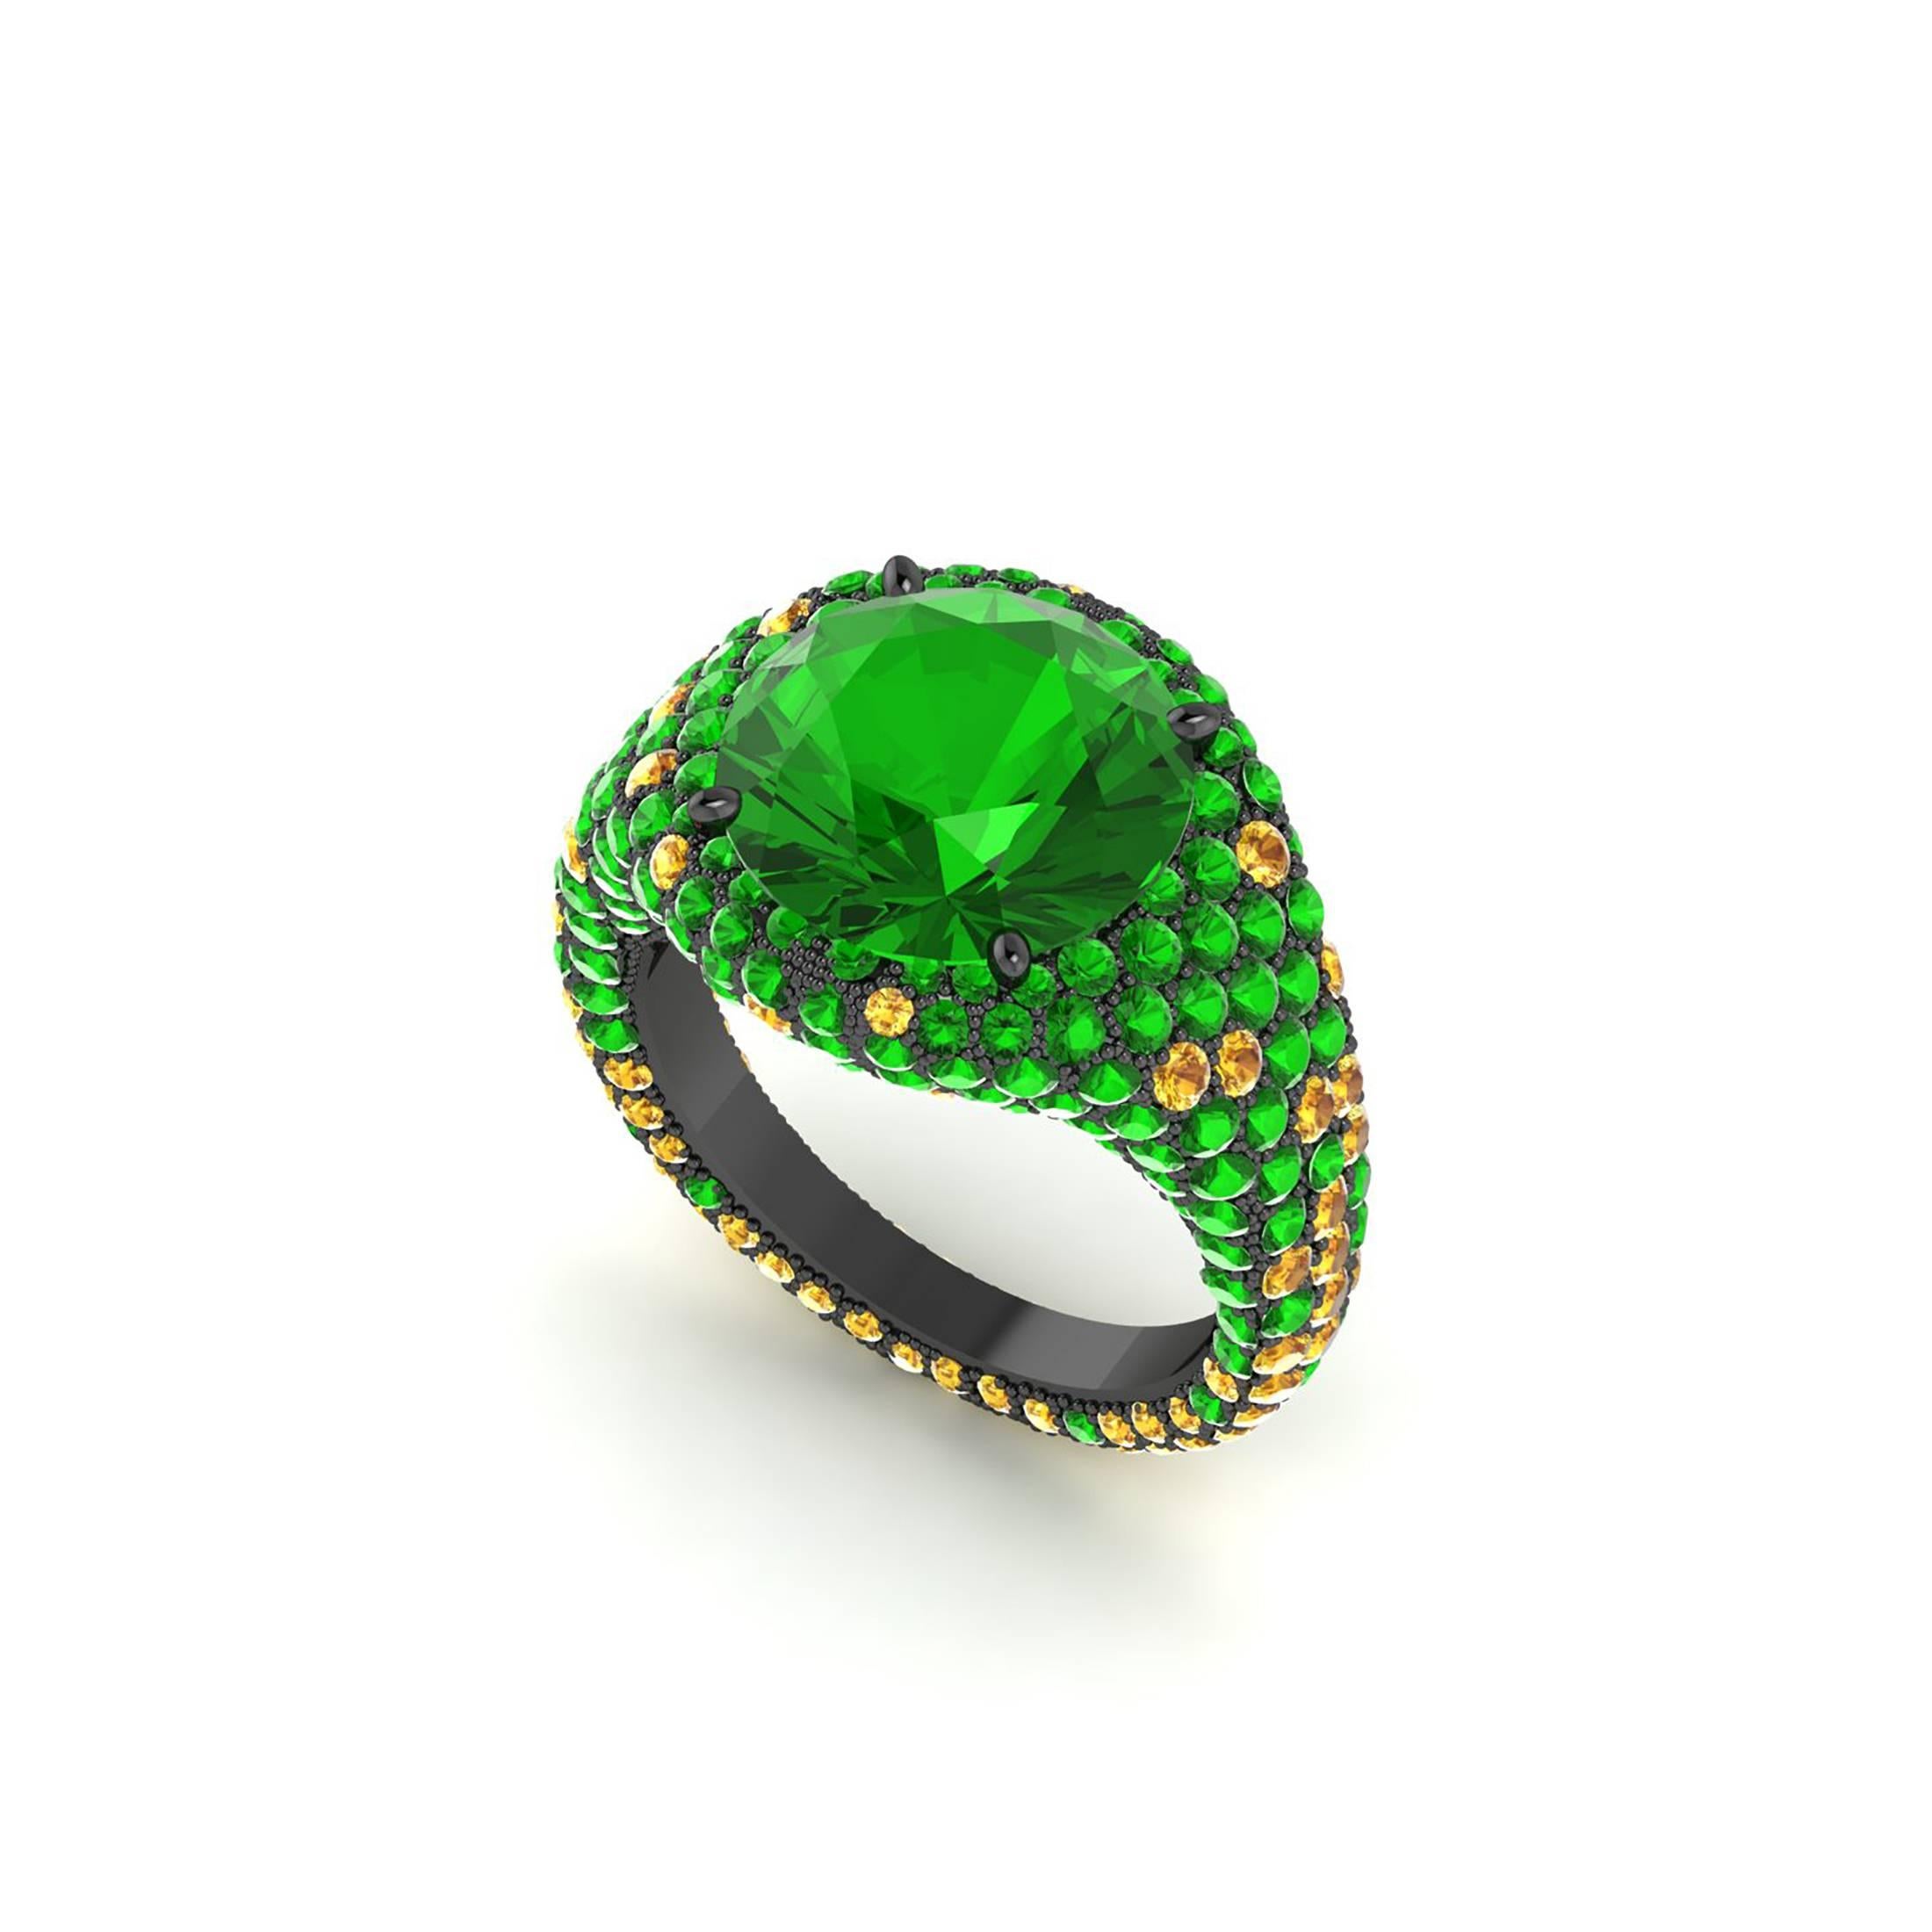 from Ferrucci, a stunning natural intense green round Tsavorite, adorned by small round natural Tsavorites gems and round natural Yellow Citrines,
hand set in a hand made 18k Black gold ring, conceived in New York city by Italian master jeweler